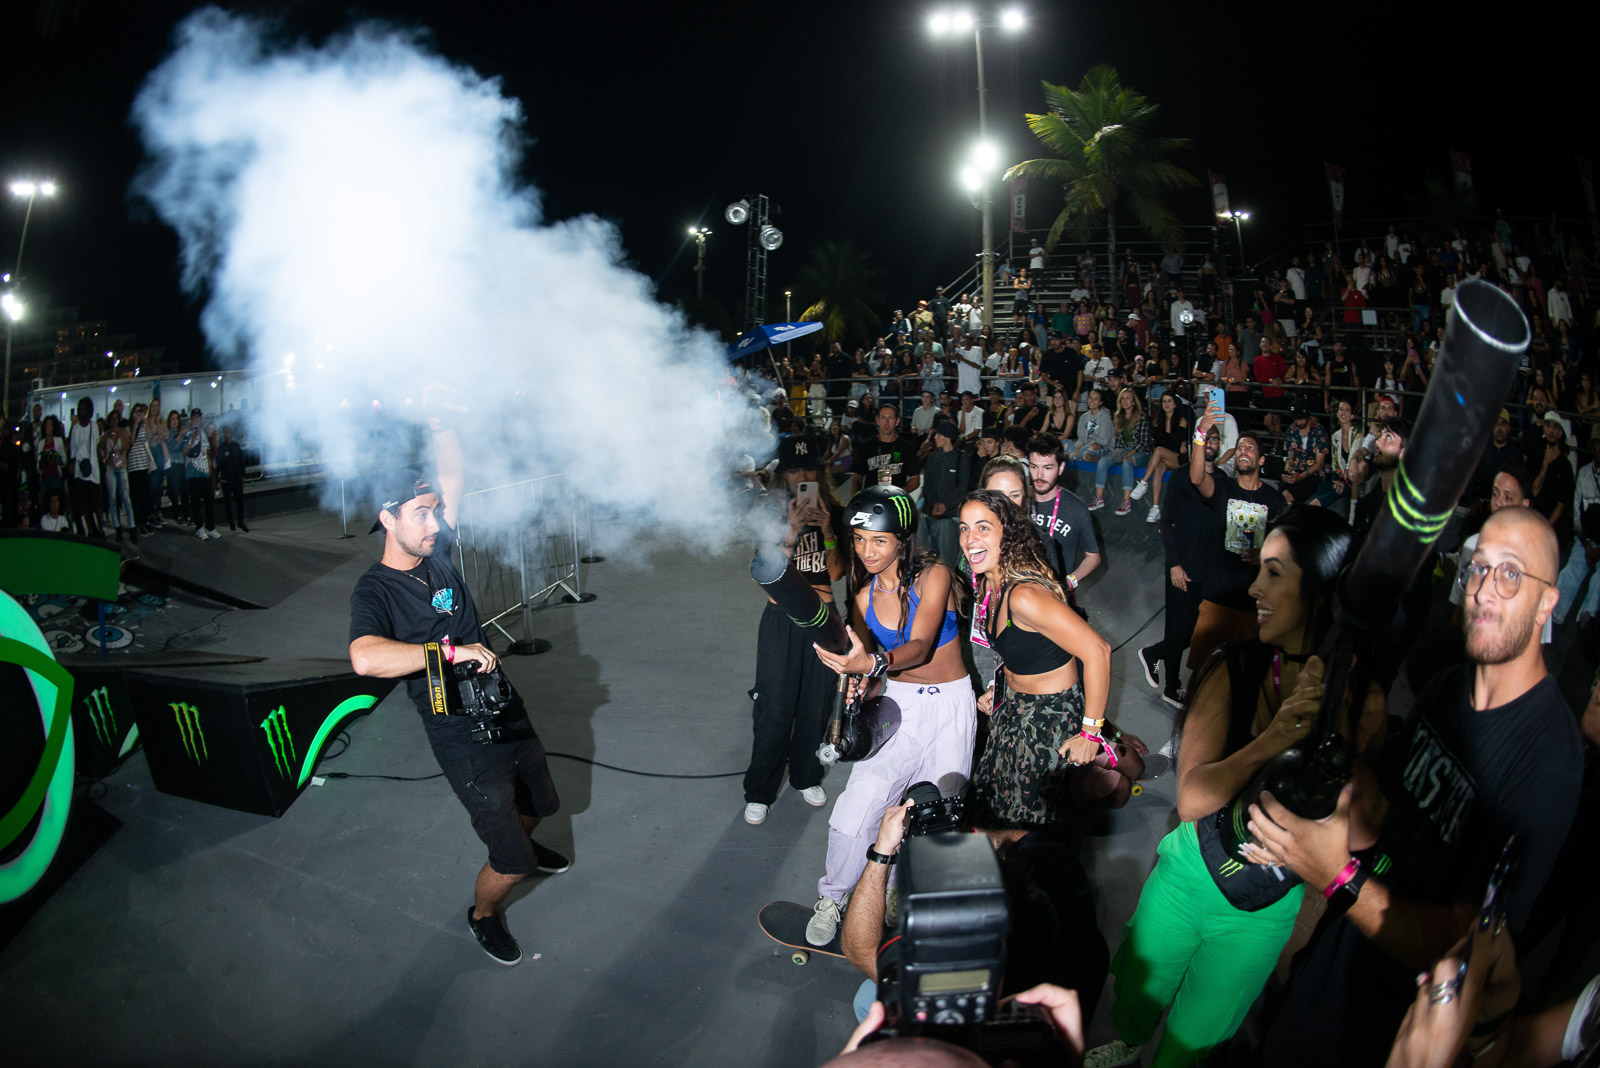 Monster Energy’s Rayssa Leal Takes First Place at STU Open Rio Skateboarding Competition